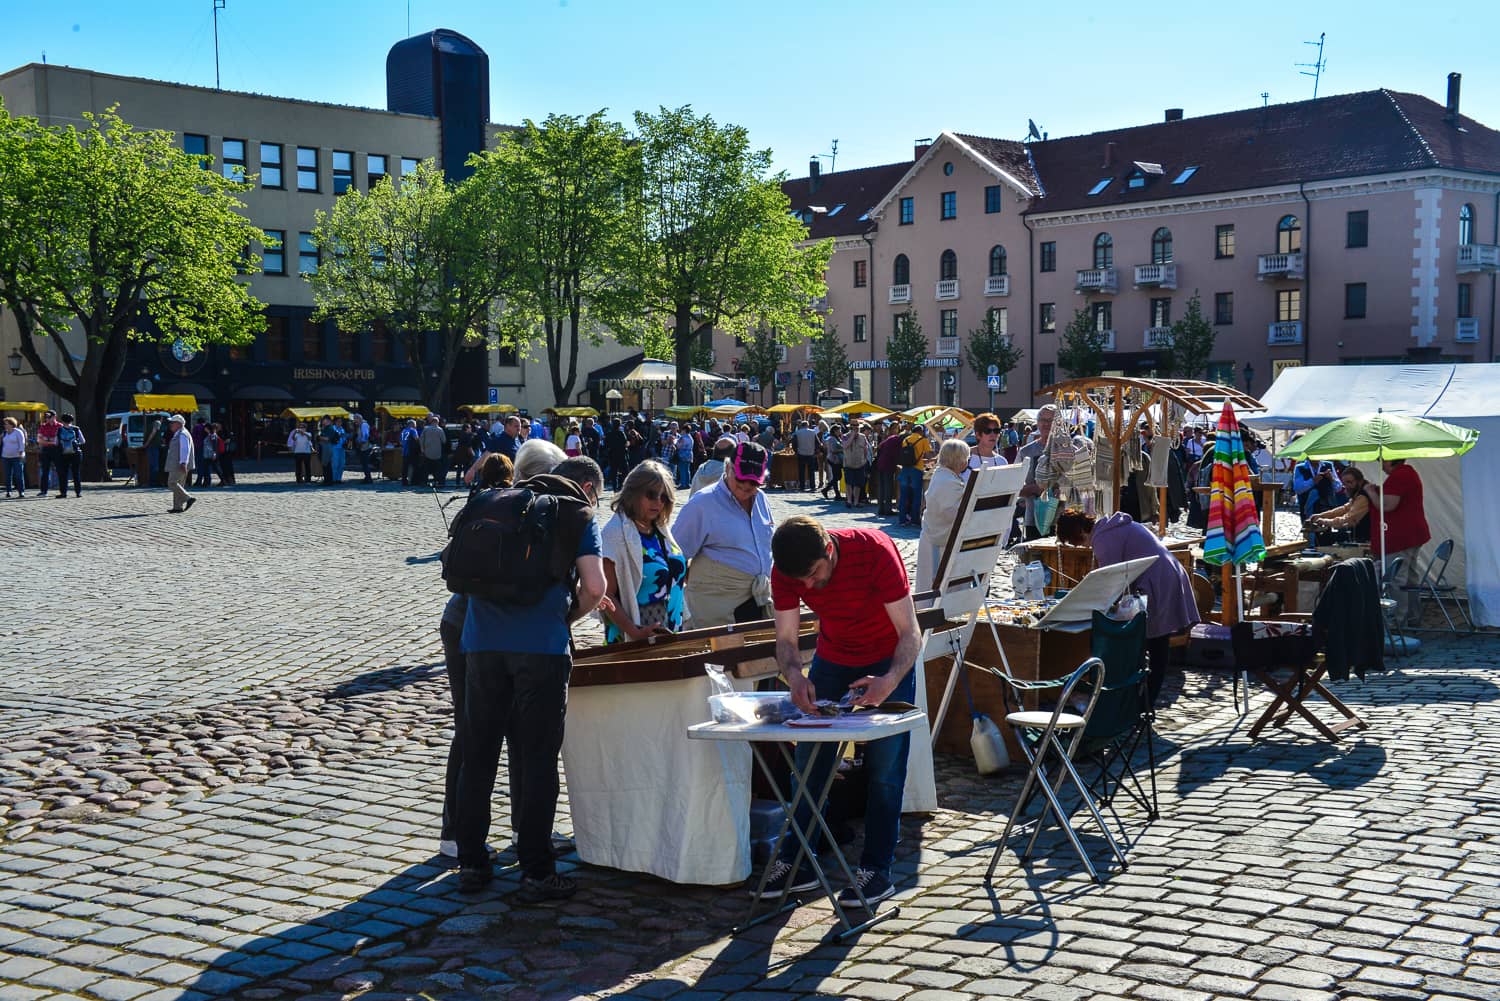 It's a beautiful day for a market in Lithuania